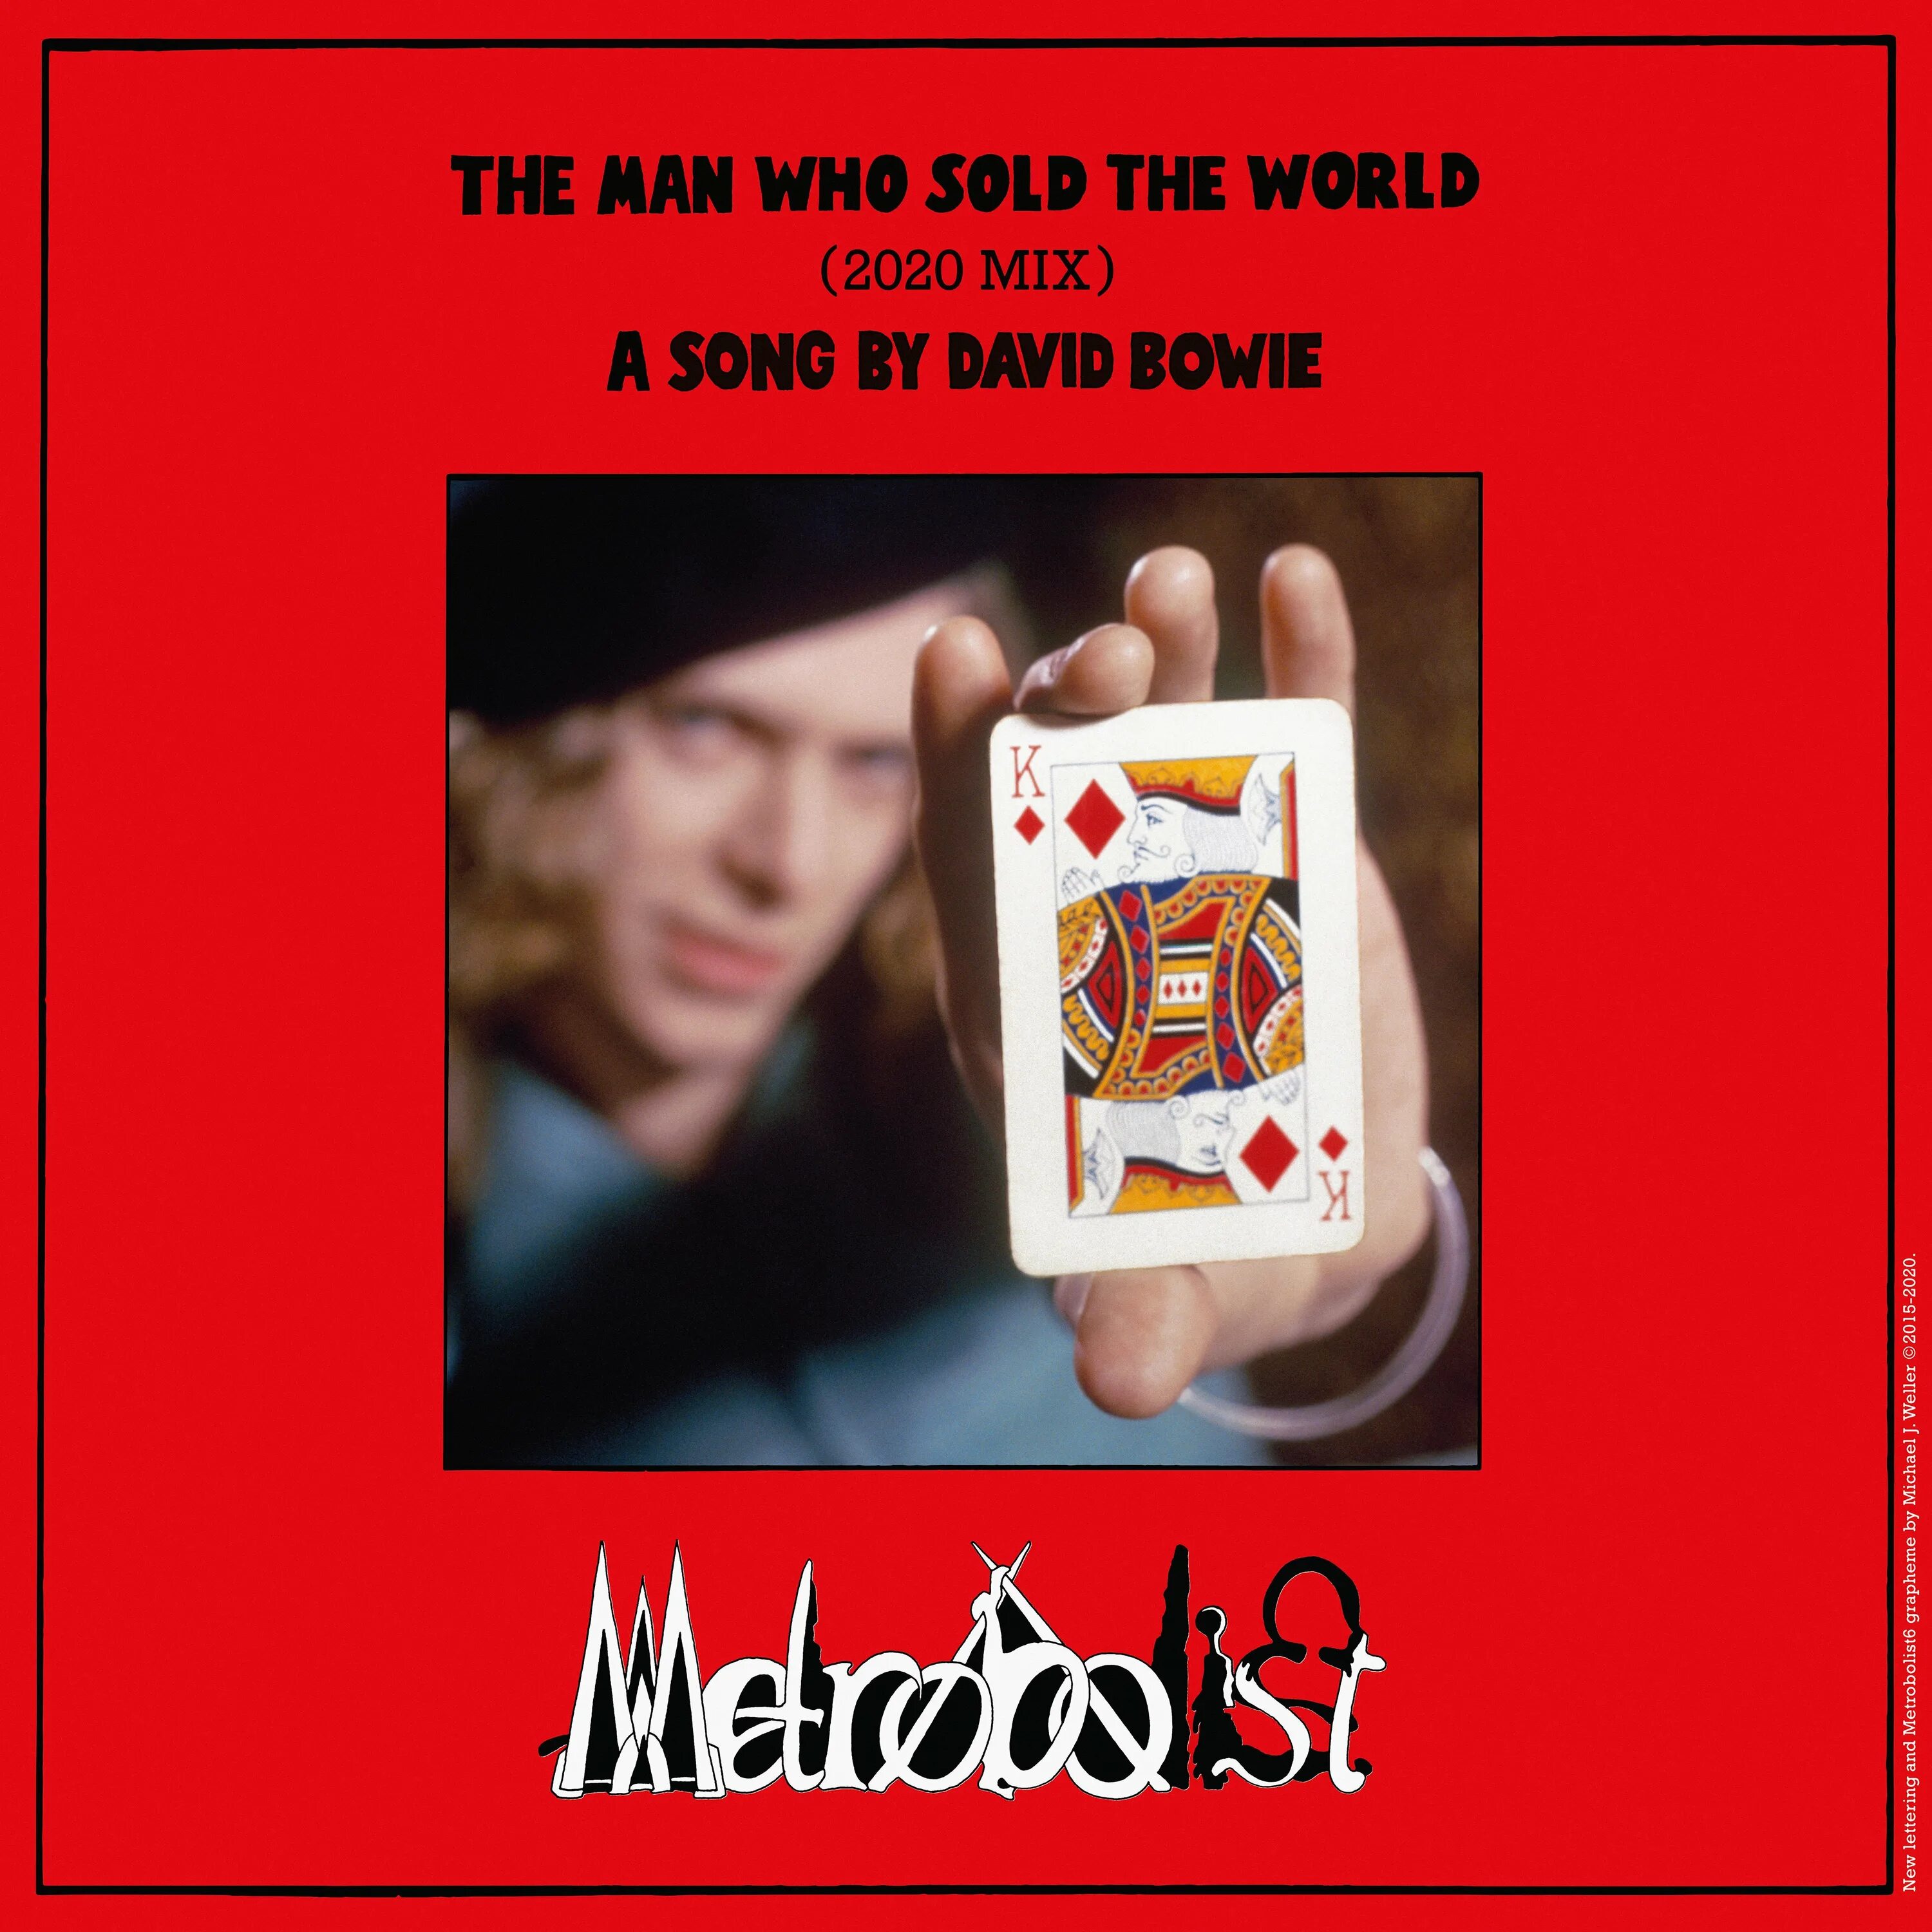 Man sold the world bowie. The man who sold the World (2020 Mix). Боуи the man who sold. David Bowie the man who sold the World. David Bowie album the man who sold the World.